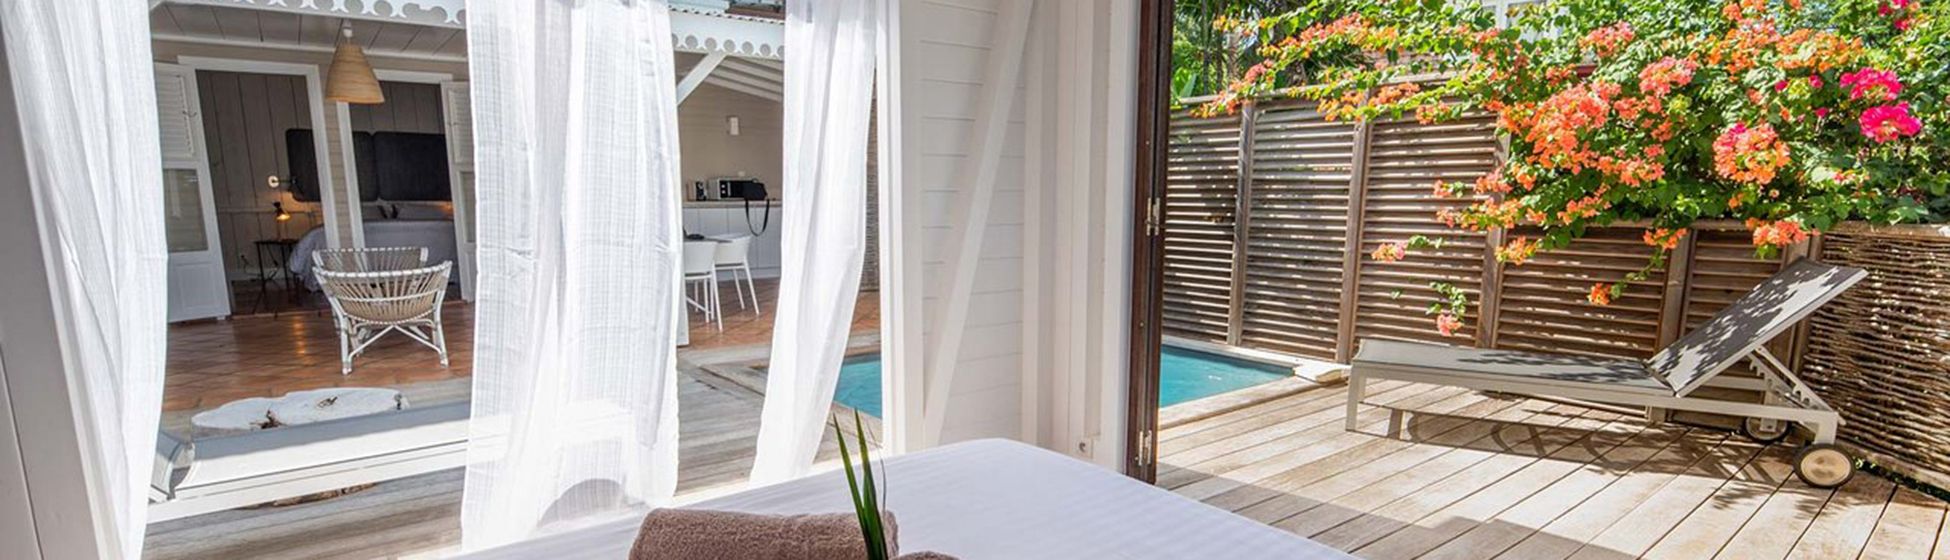 Residence hoteliere martinique